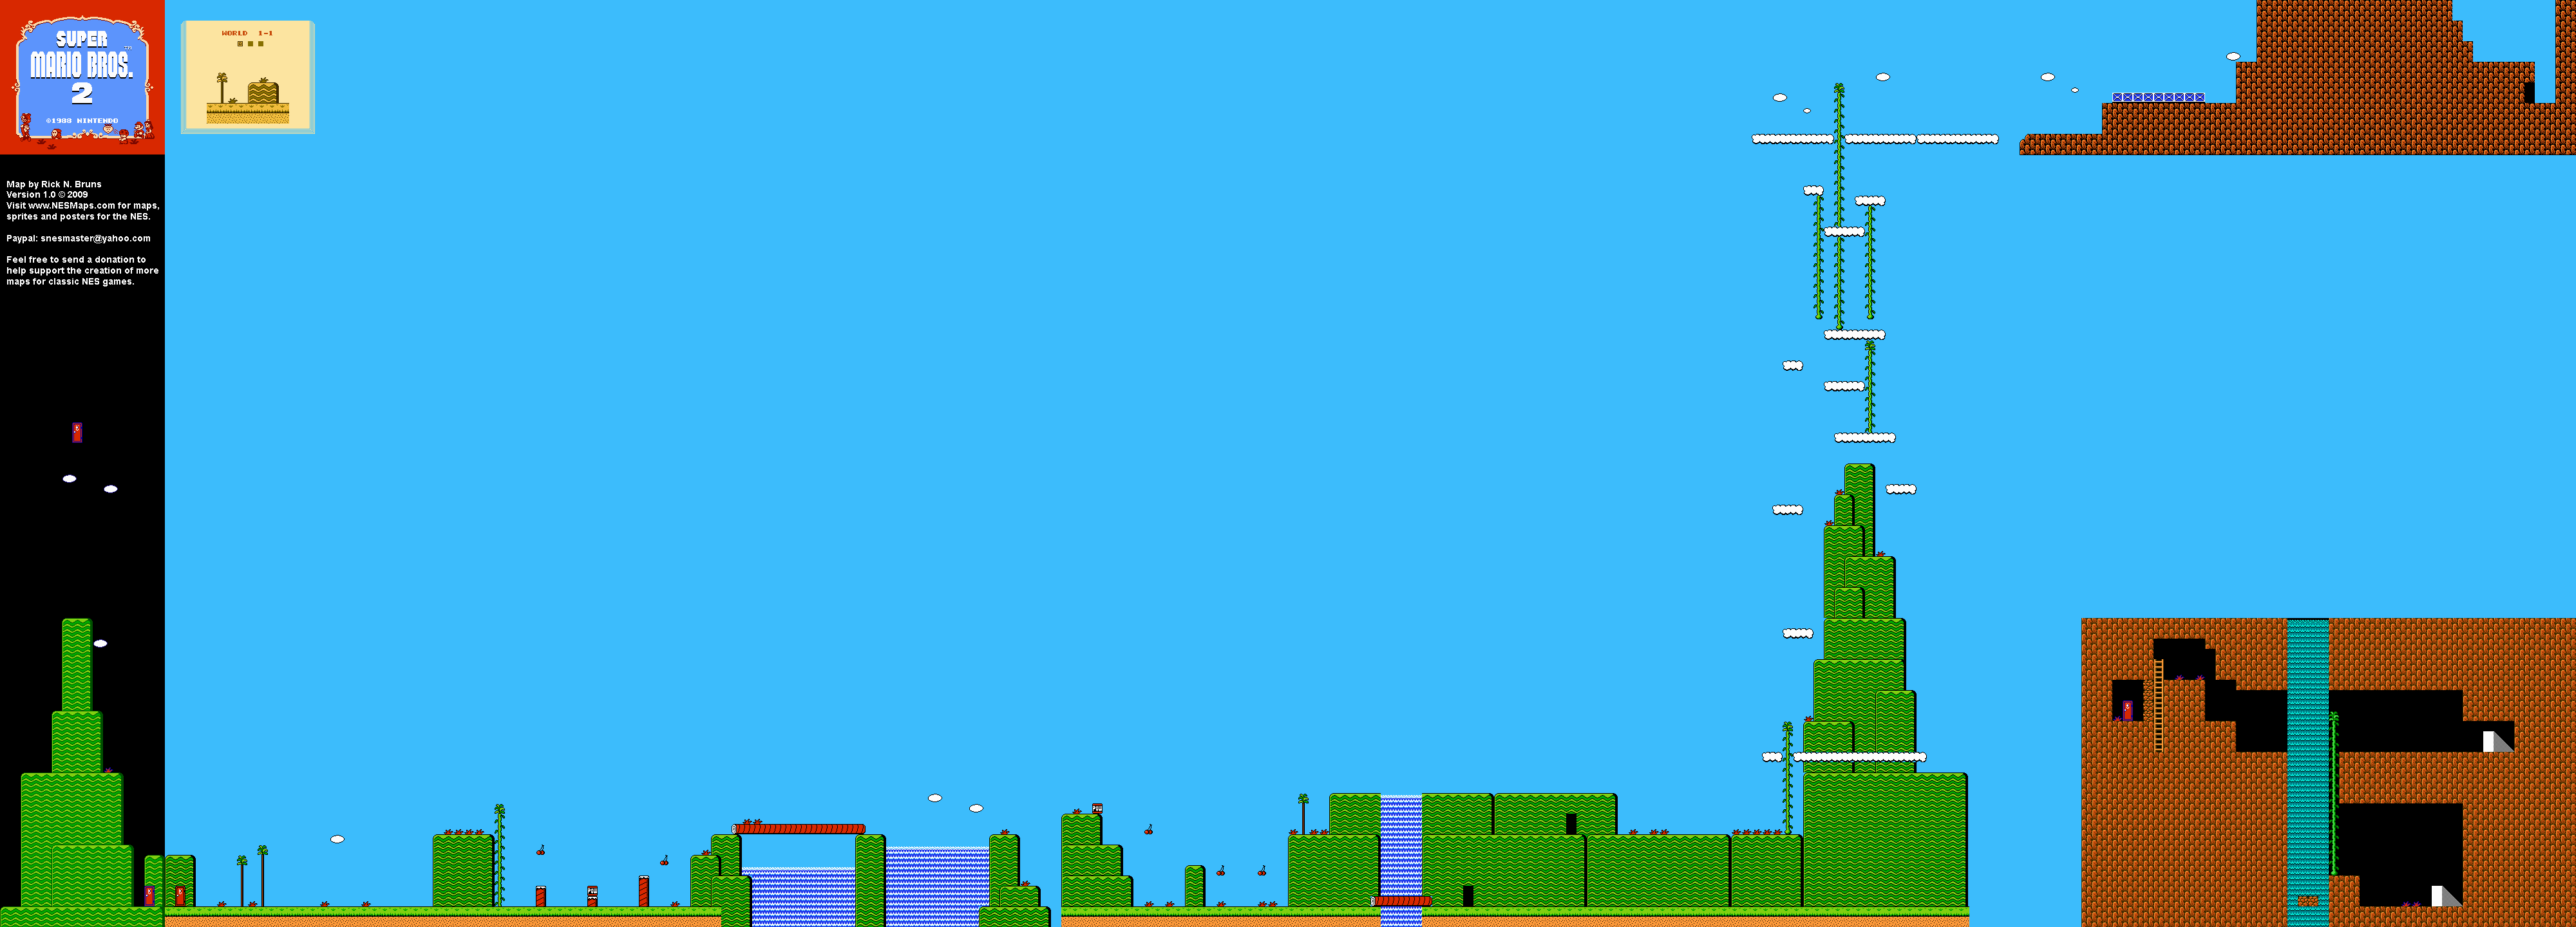 Super Mario Brothers 2 - World 1-1 Nintendo NES Background Only Map